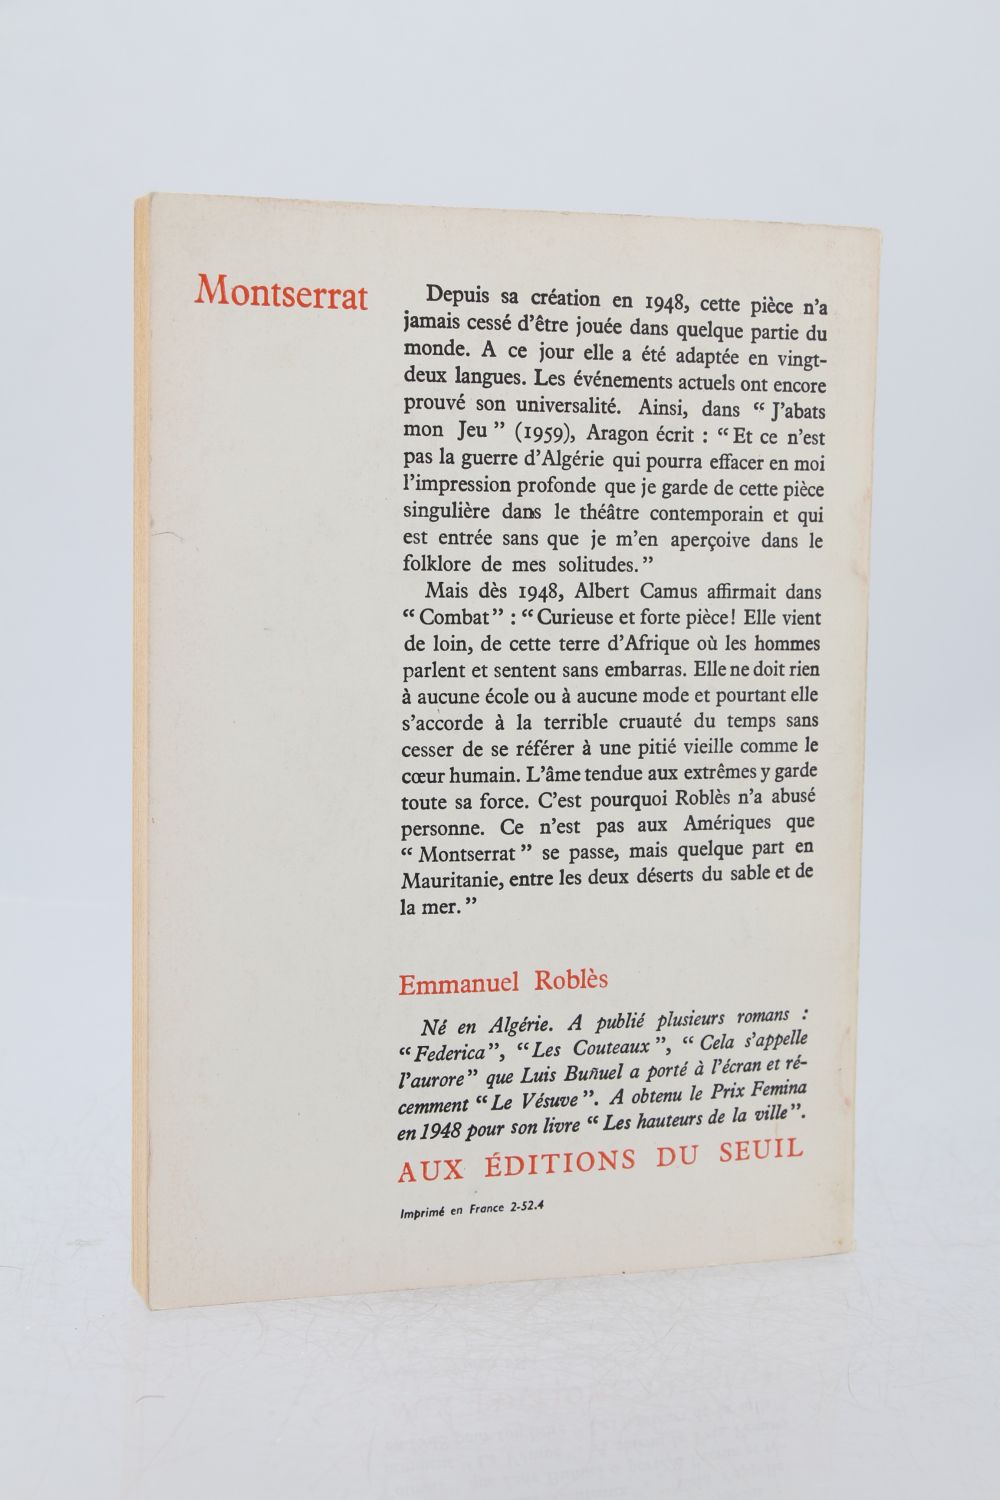 Montserrat' Adapted From the French of Emmanuel Robles by Lillian